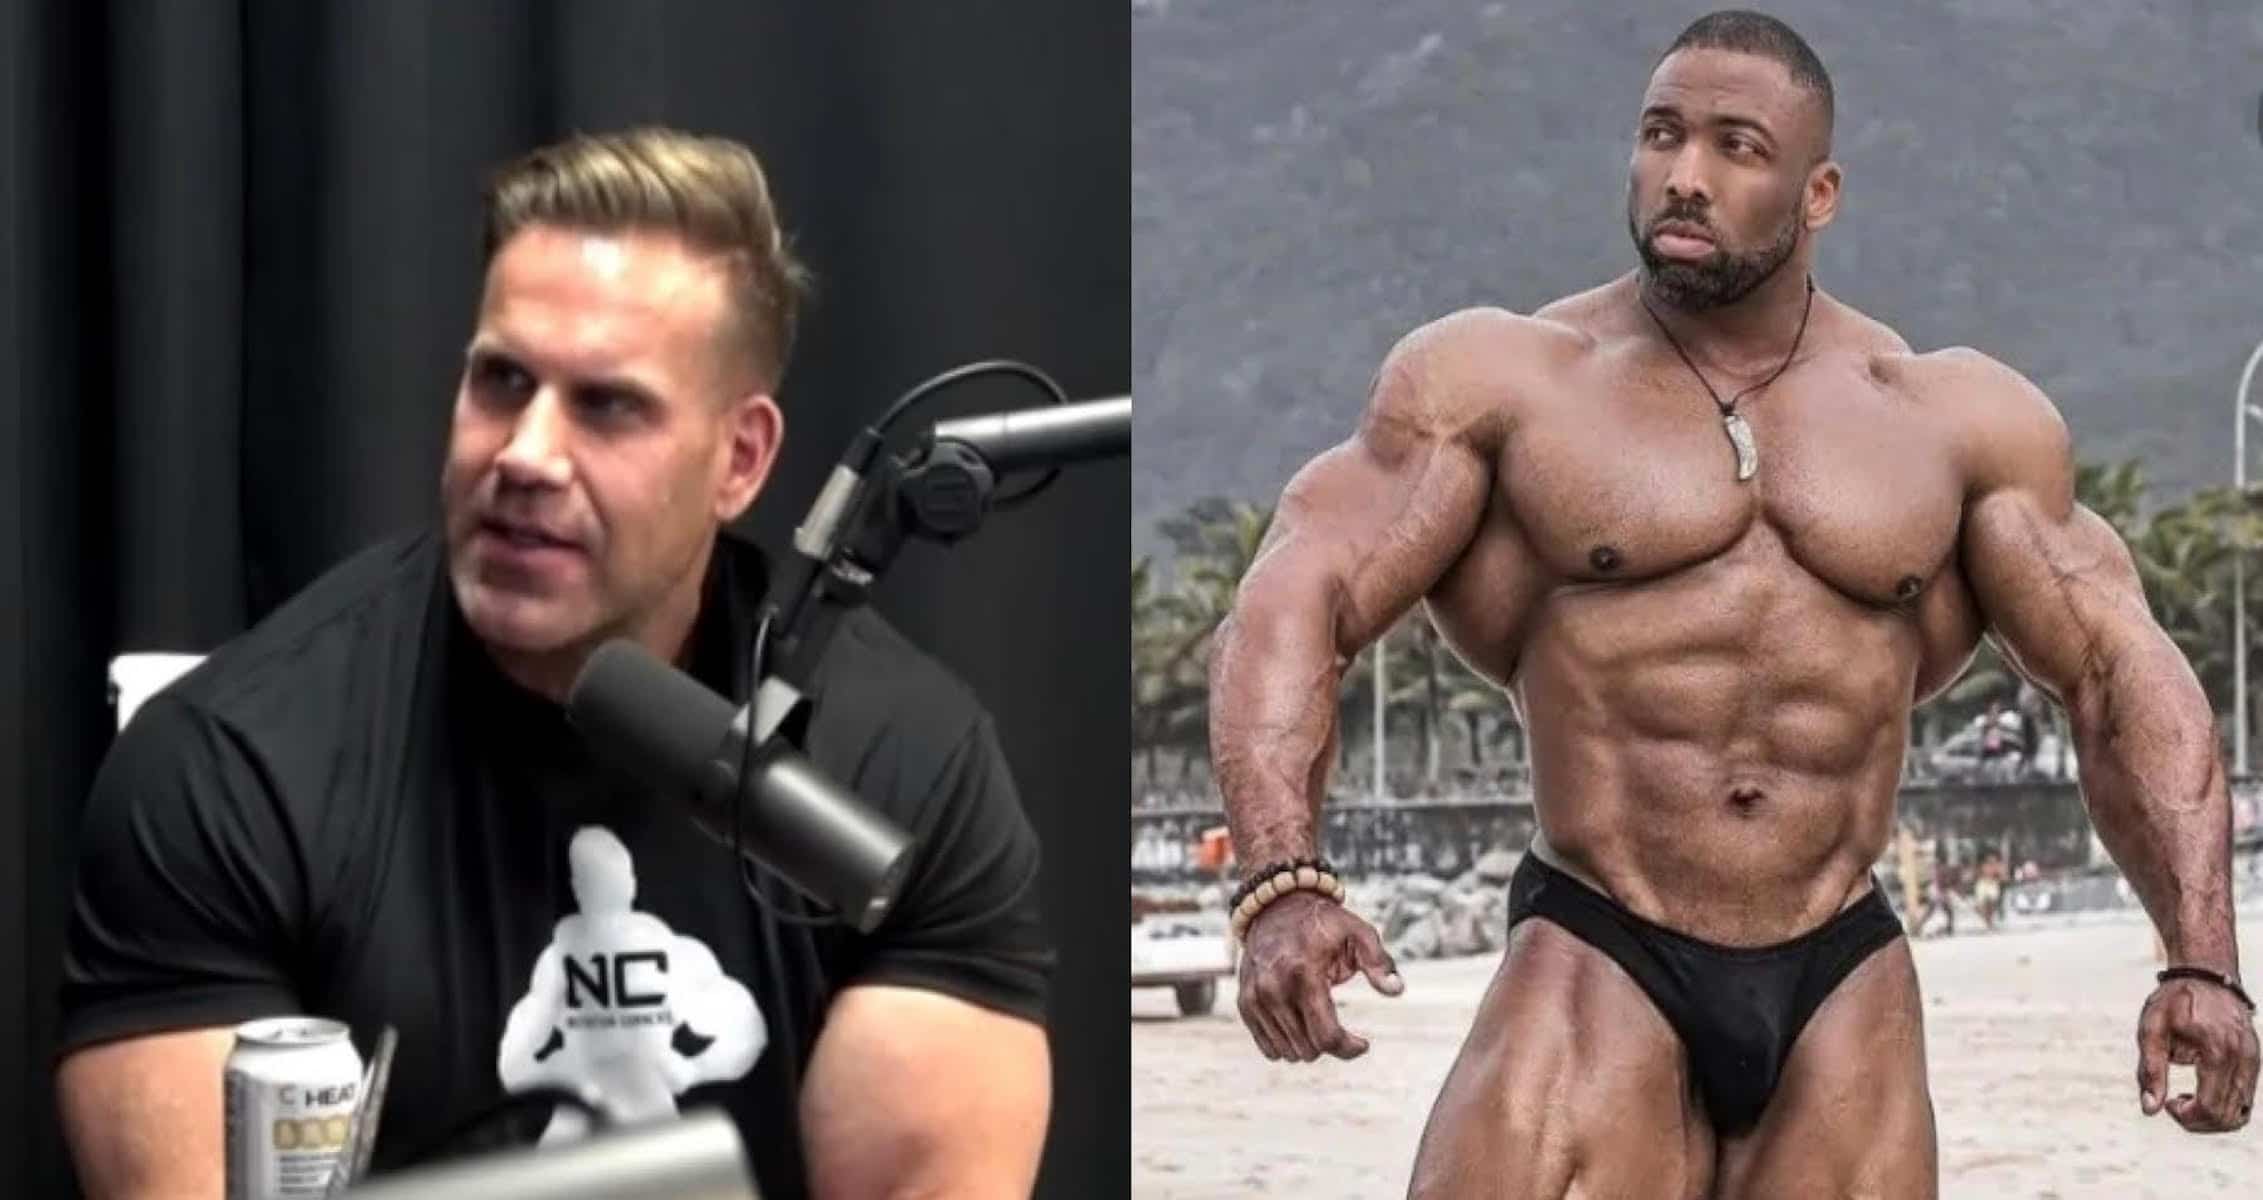 Jay Cutler Speaks On Cedric McMillan’s Legacy: ‘One Of The Best Physiques We Have Seen In Quite Some Time’